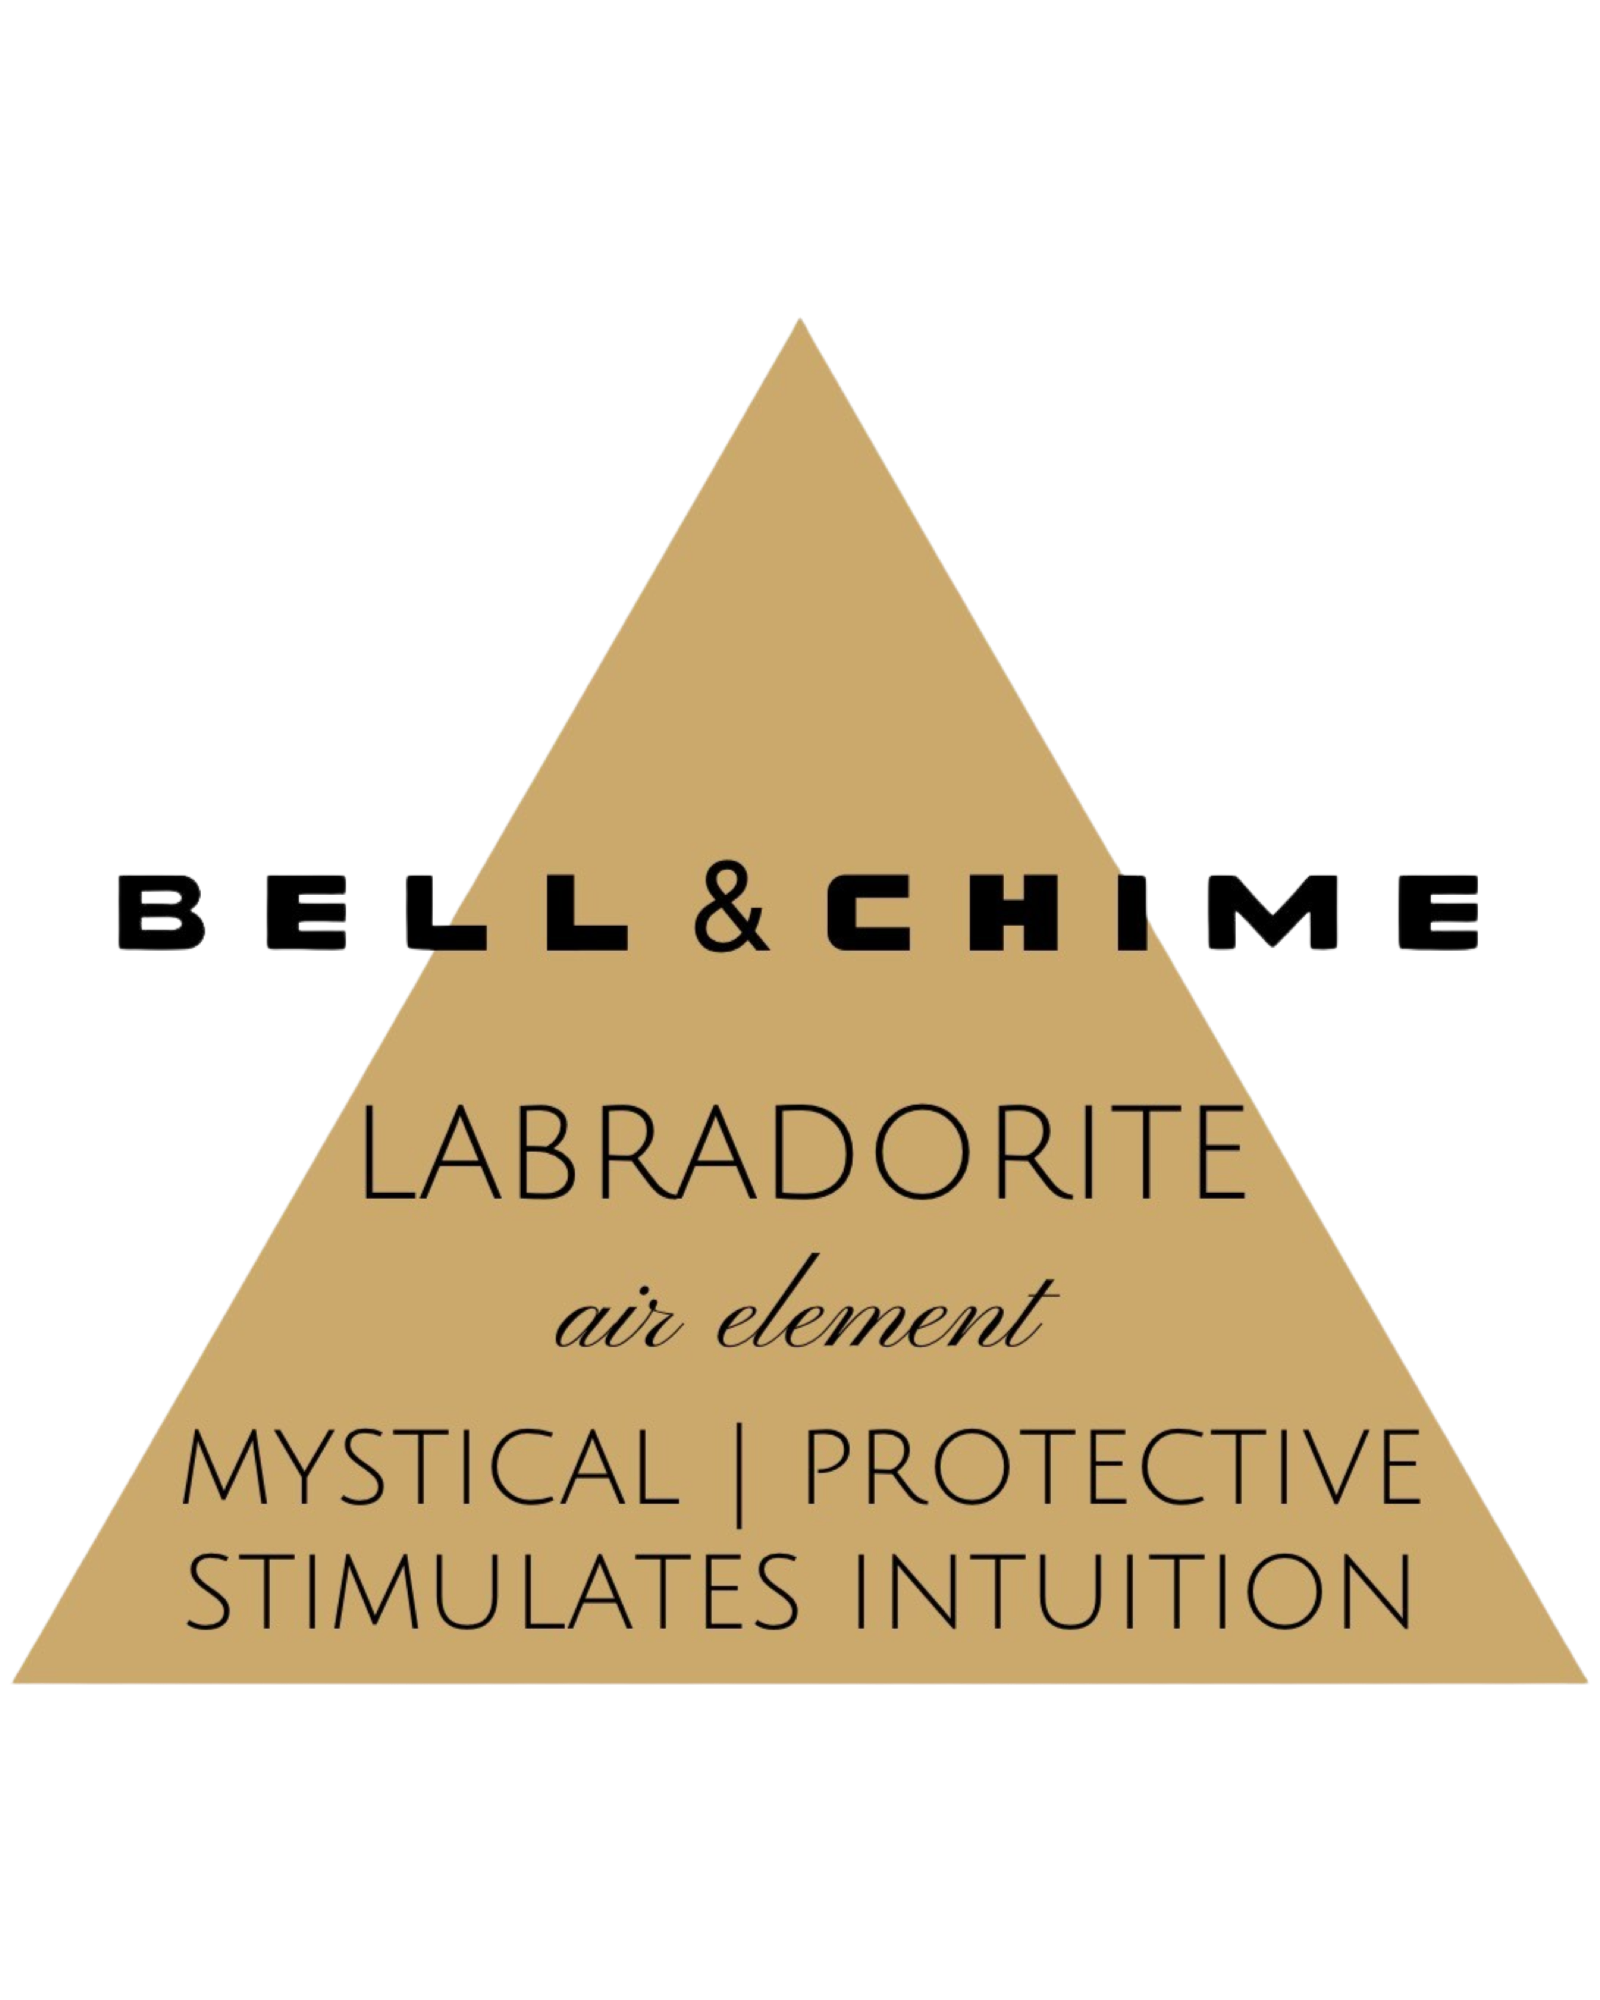 Bell & Chime: Air Element "Mystical, Protective, Stimulates Intuition"